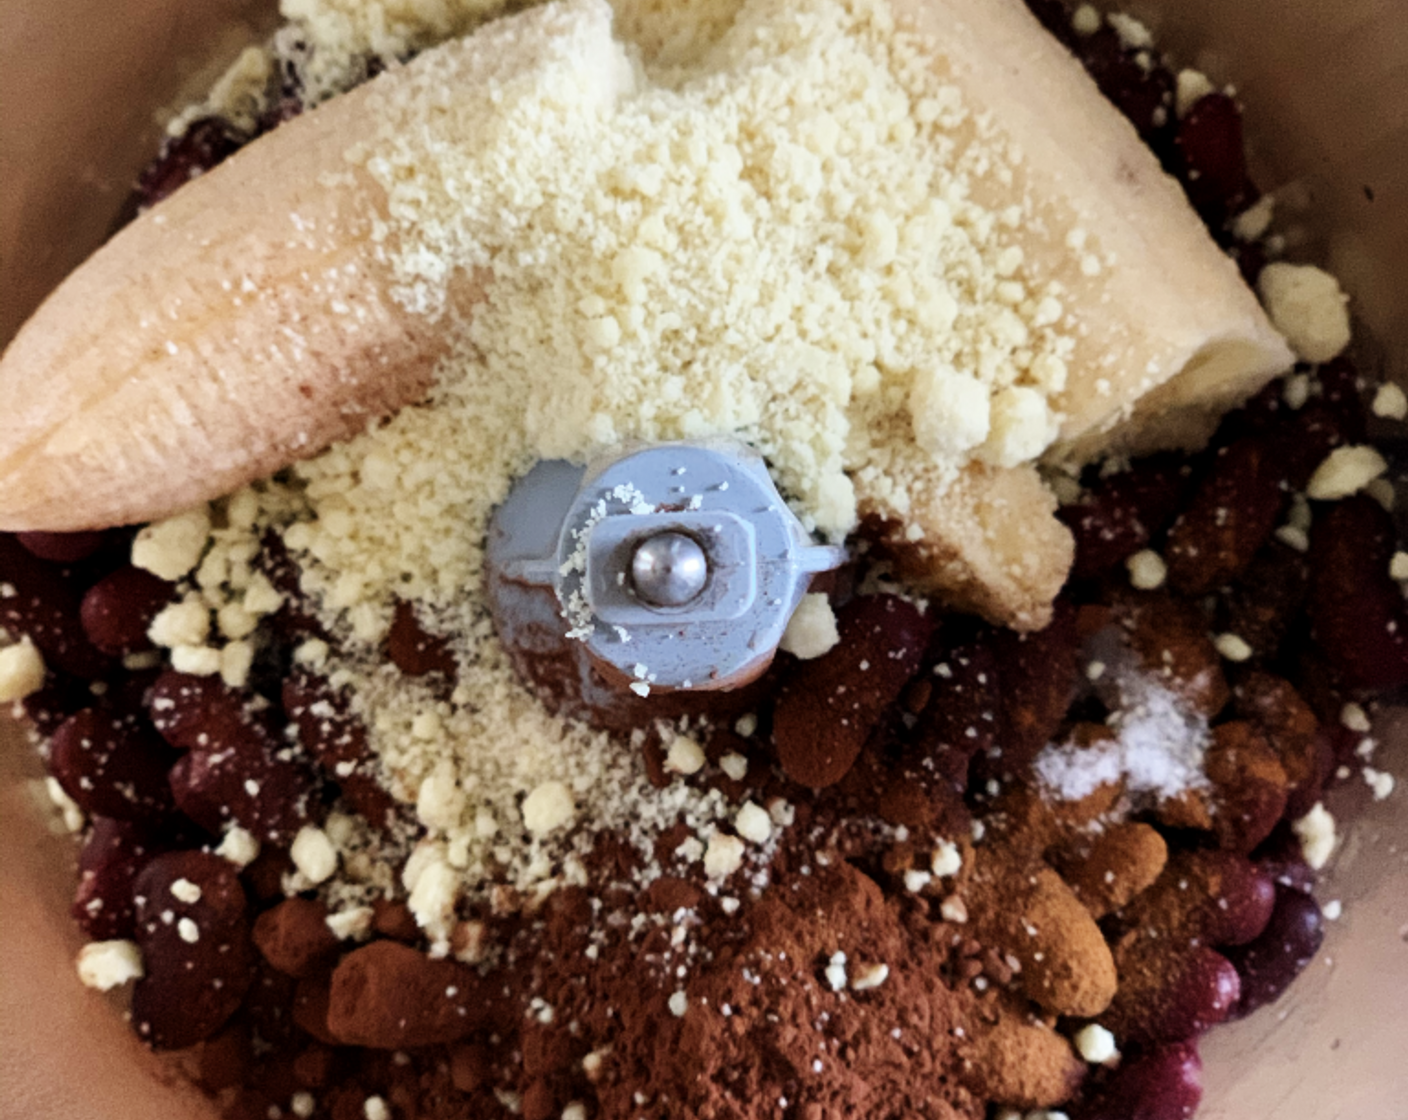 step 2 In a food processor combine the Dry Red Beans (1 cup), Banana (3/4 cup), Maple Syrup (3 Tbsp) if using, Almond Flour (1/4 cup), Coconut Flour (1 Tbsp), Unsweetened Cocoa Powder (3 1/2 Tbsp), Ground Cinnamon (1 dash), and Salt (1 pinch).